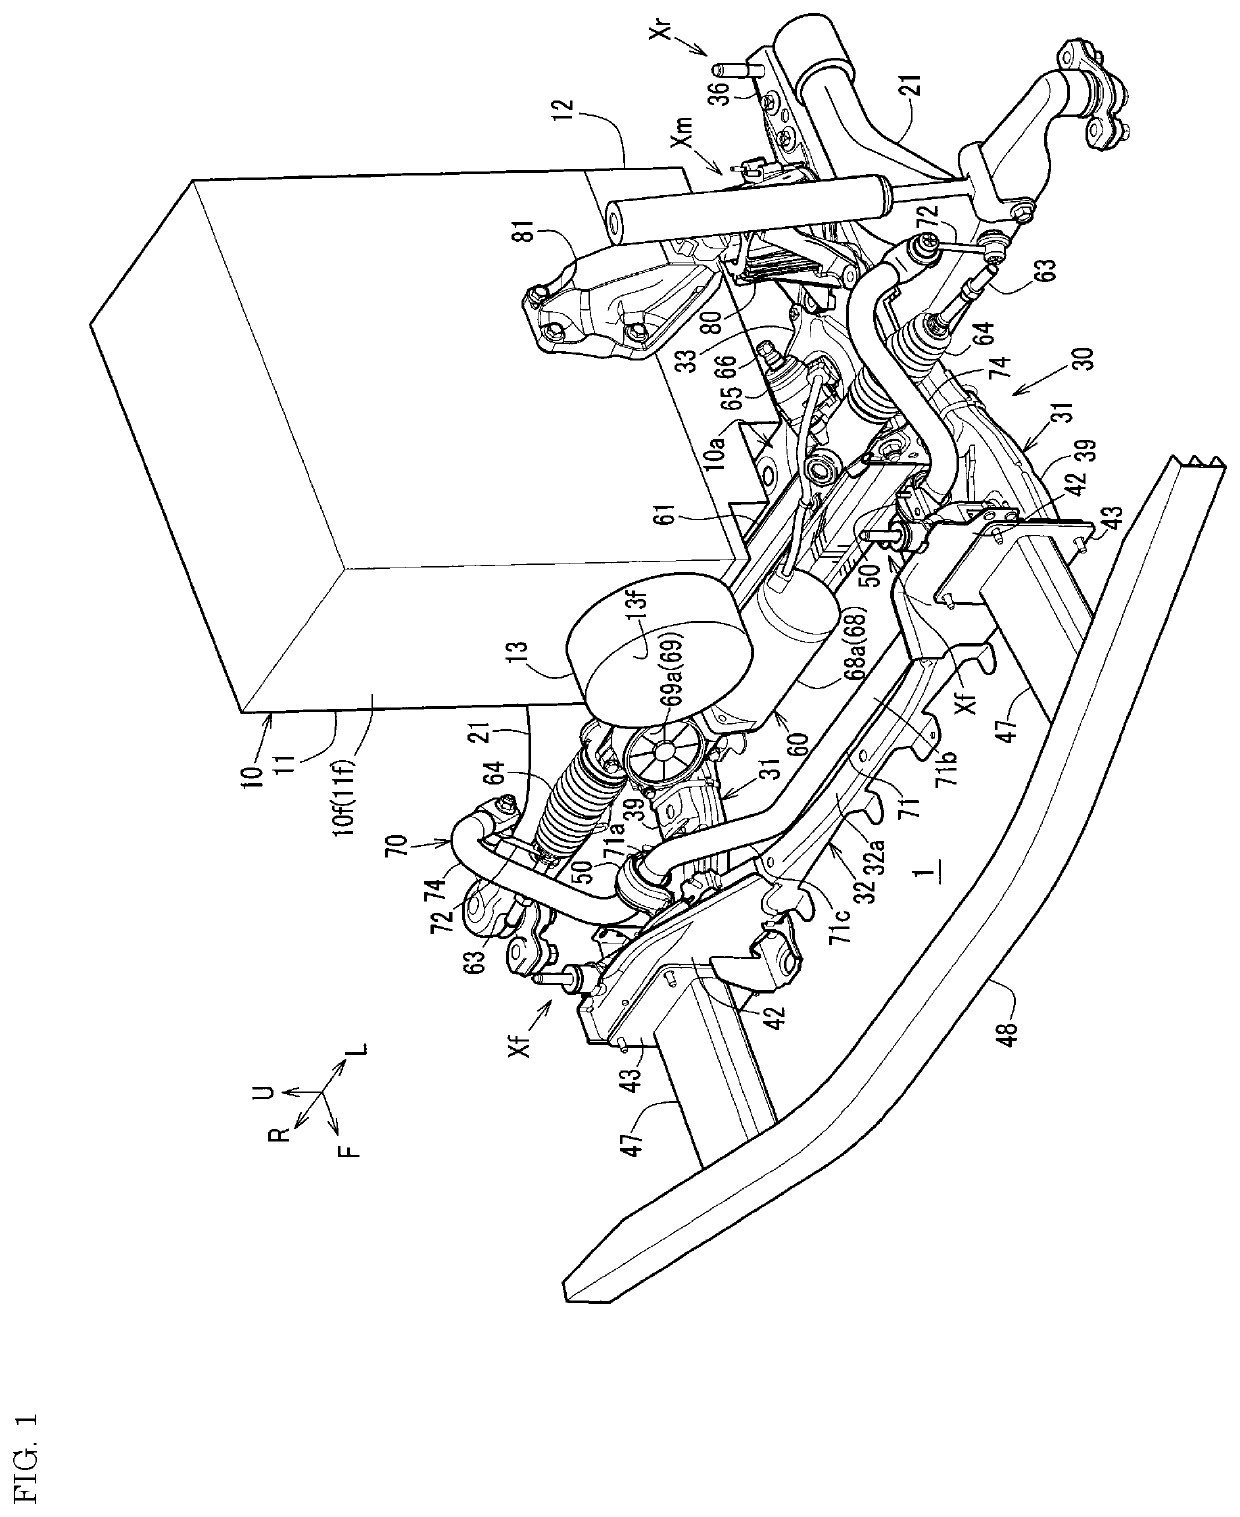 Subframe structure